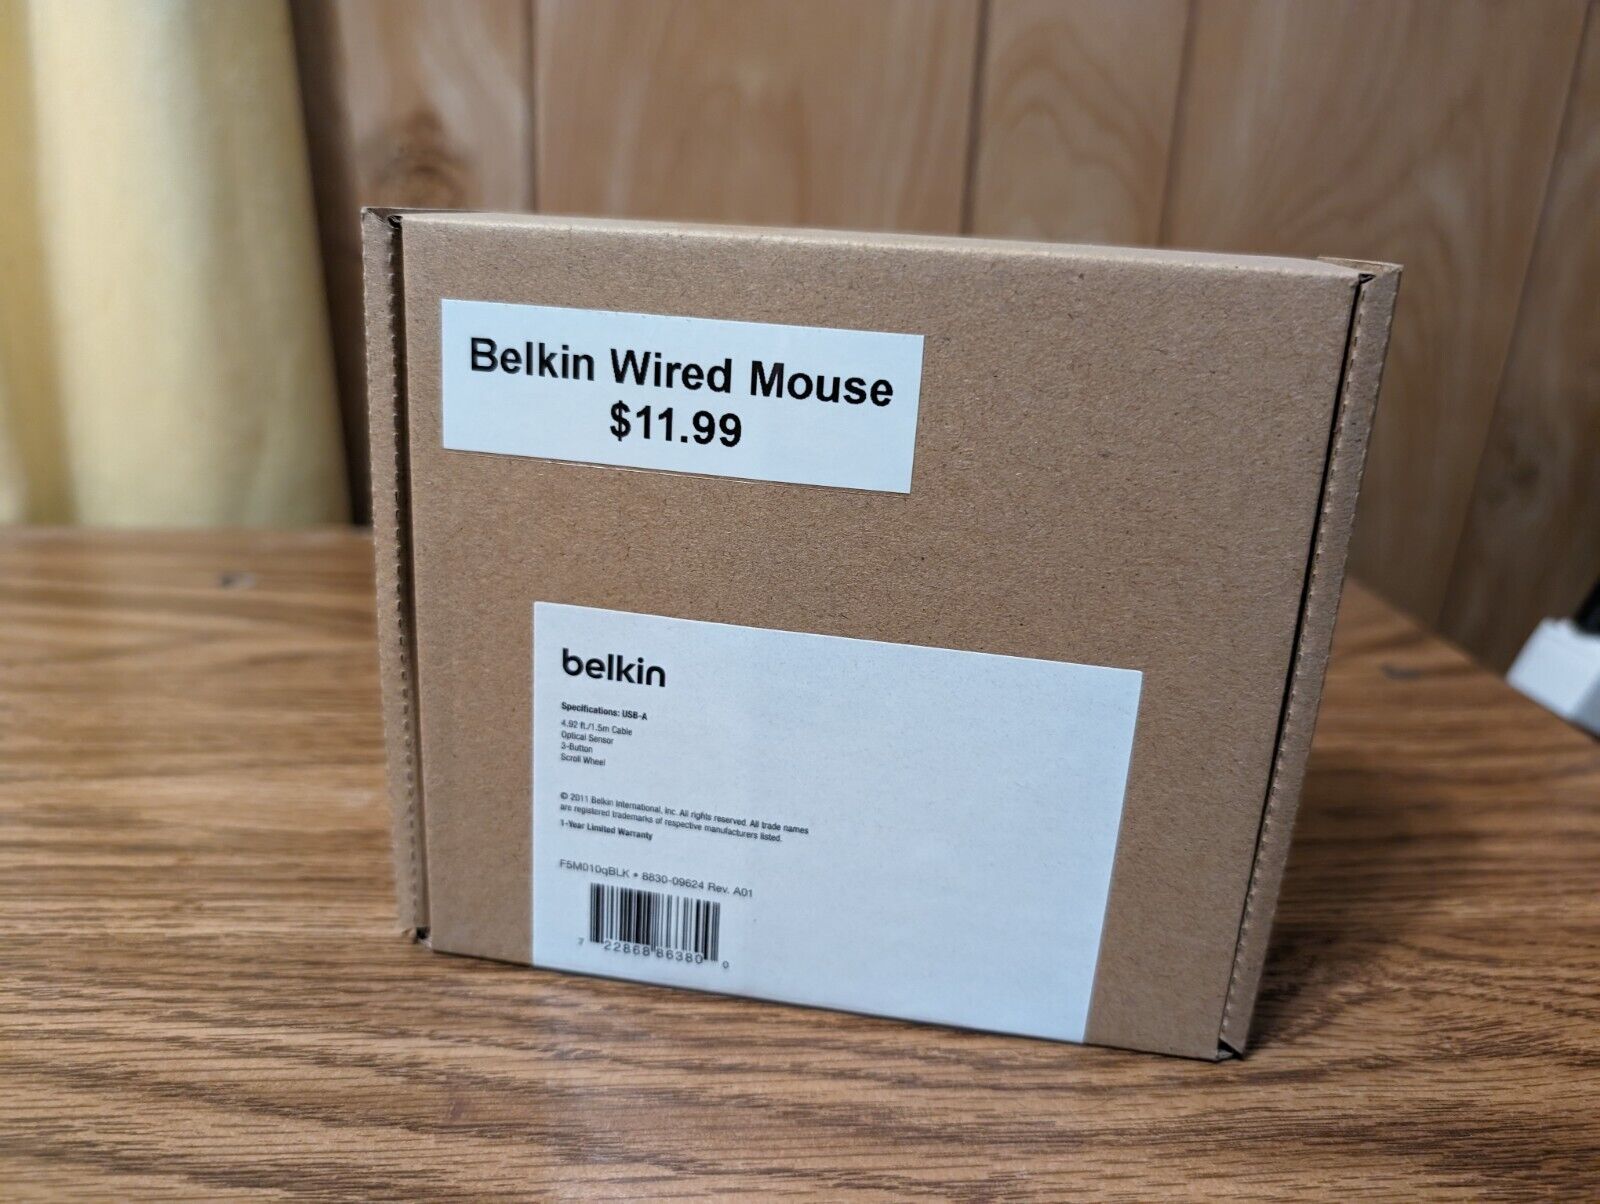 Belkin USB Type A Wired Mouse - Black - New in box -Storefront closing sale